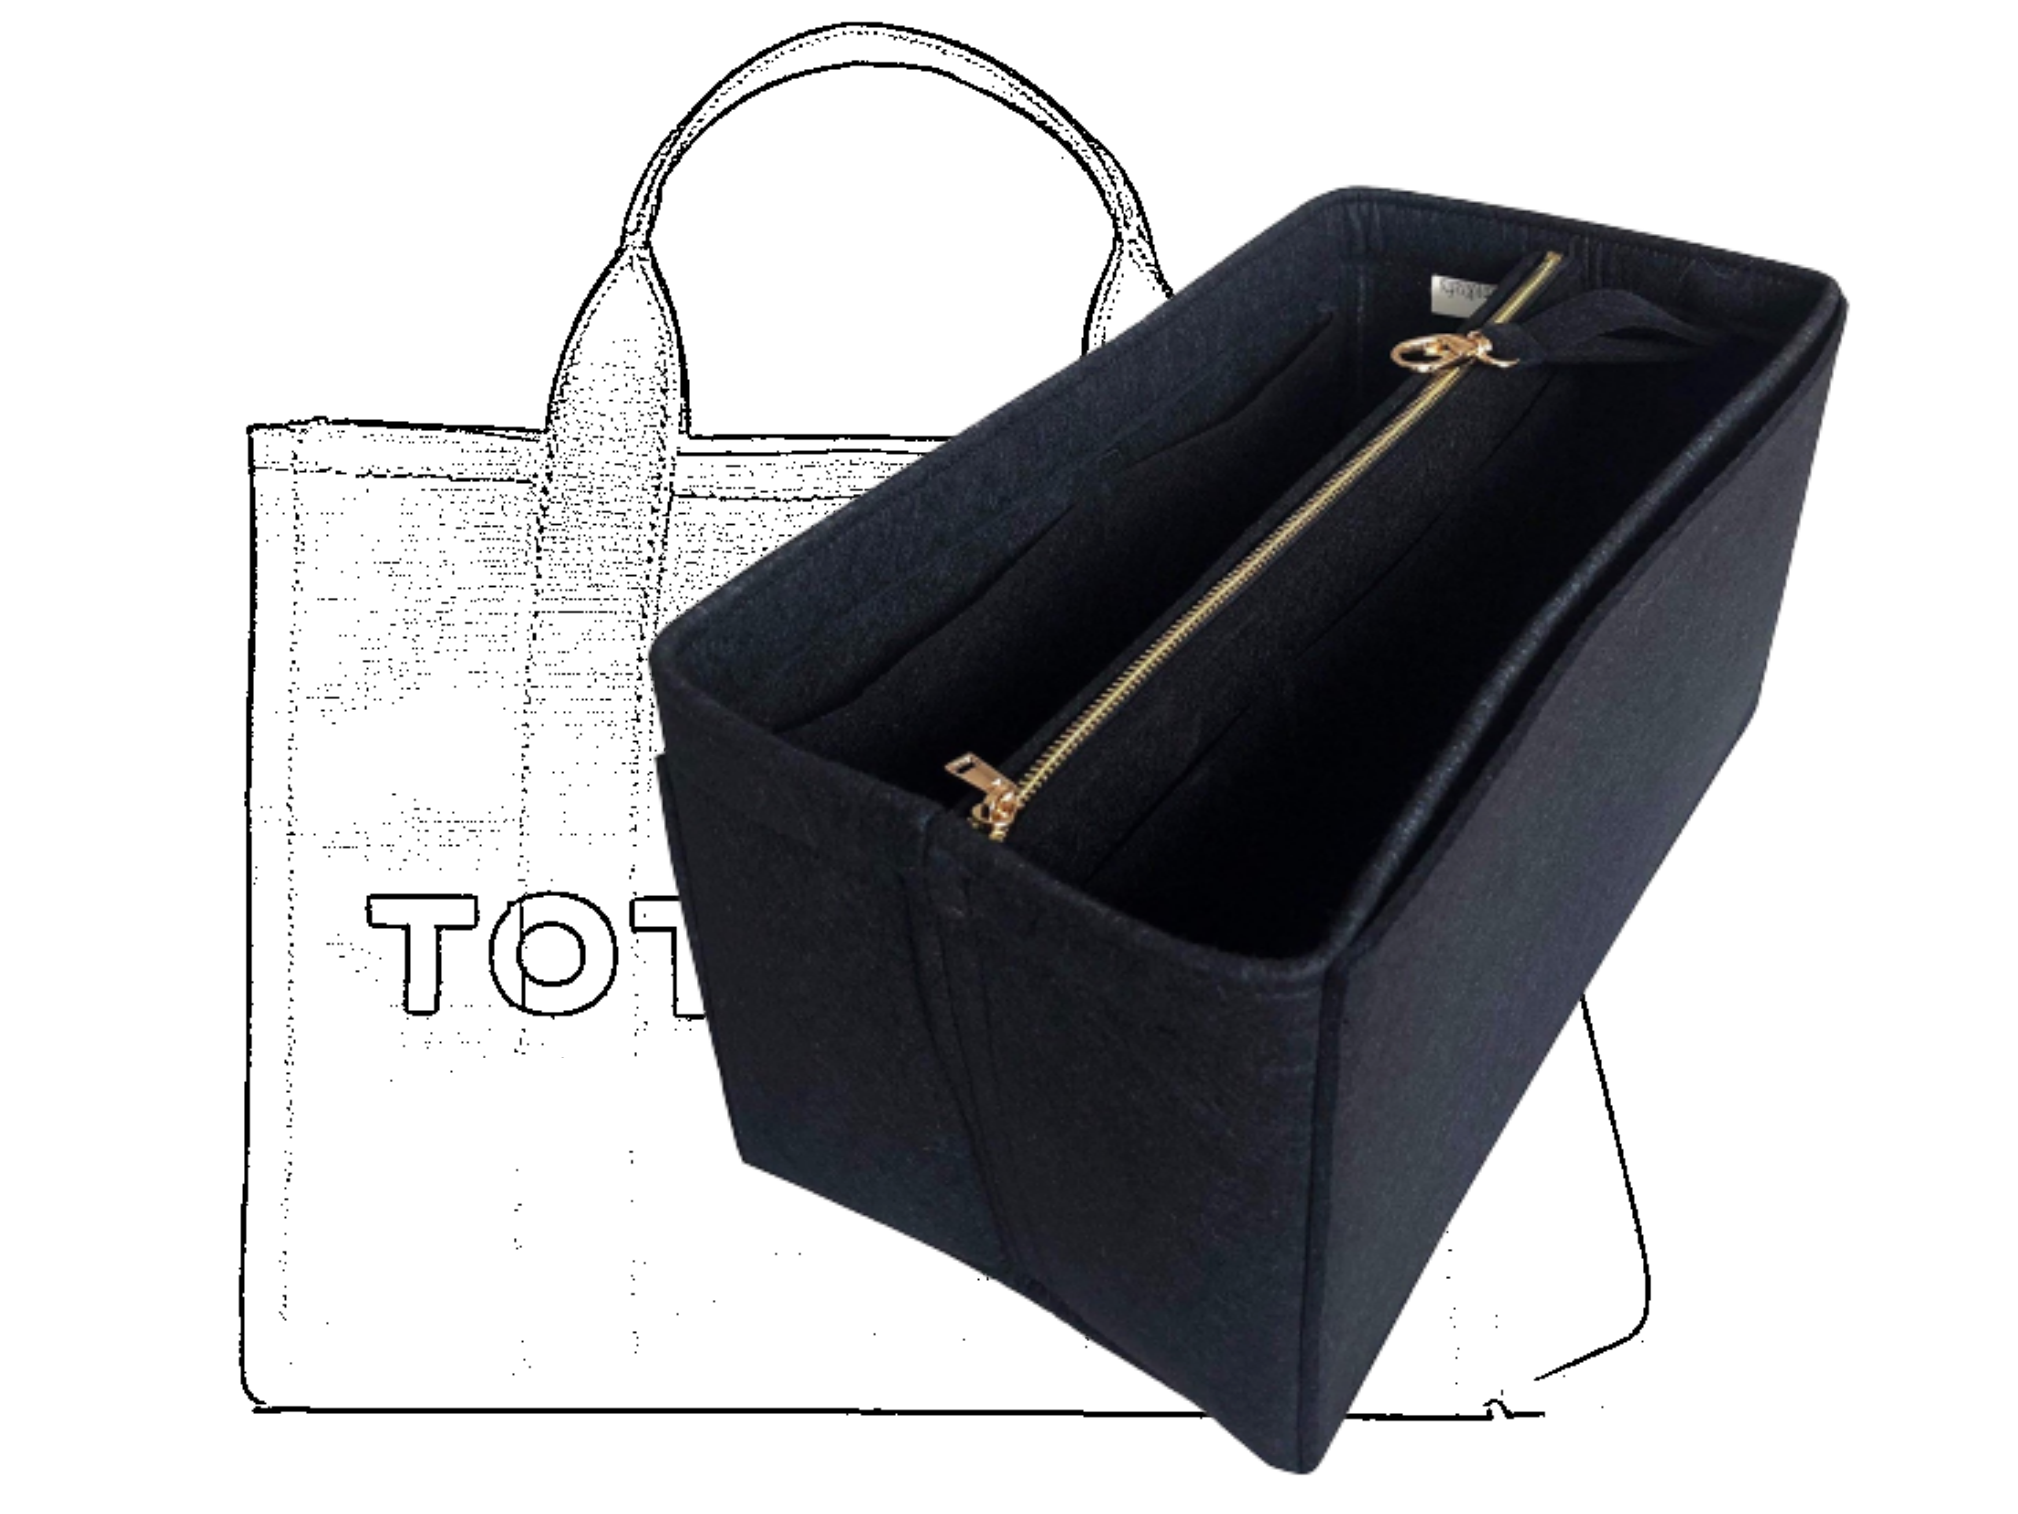 Purse Organizer for Dior Book Tote, Bag Organizer with Zipper Top Closure  and Double Bottle Holders